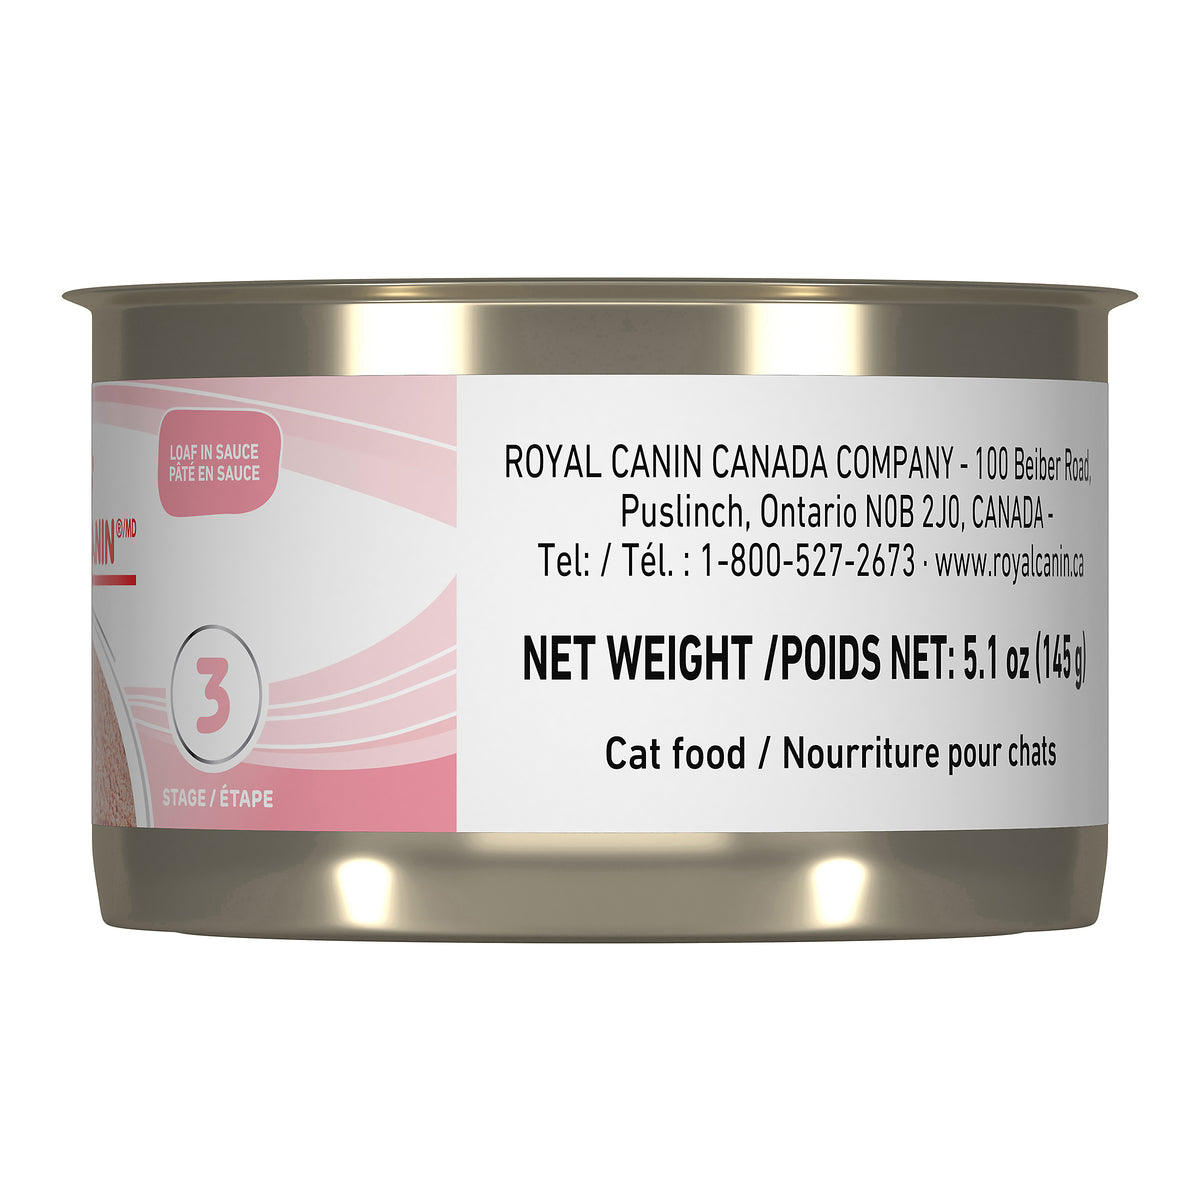 Royal Canin Kitten (Loaf in Sauce) - Wet Canned cat food (145g)